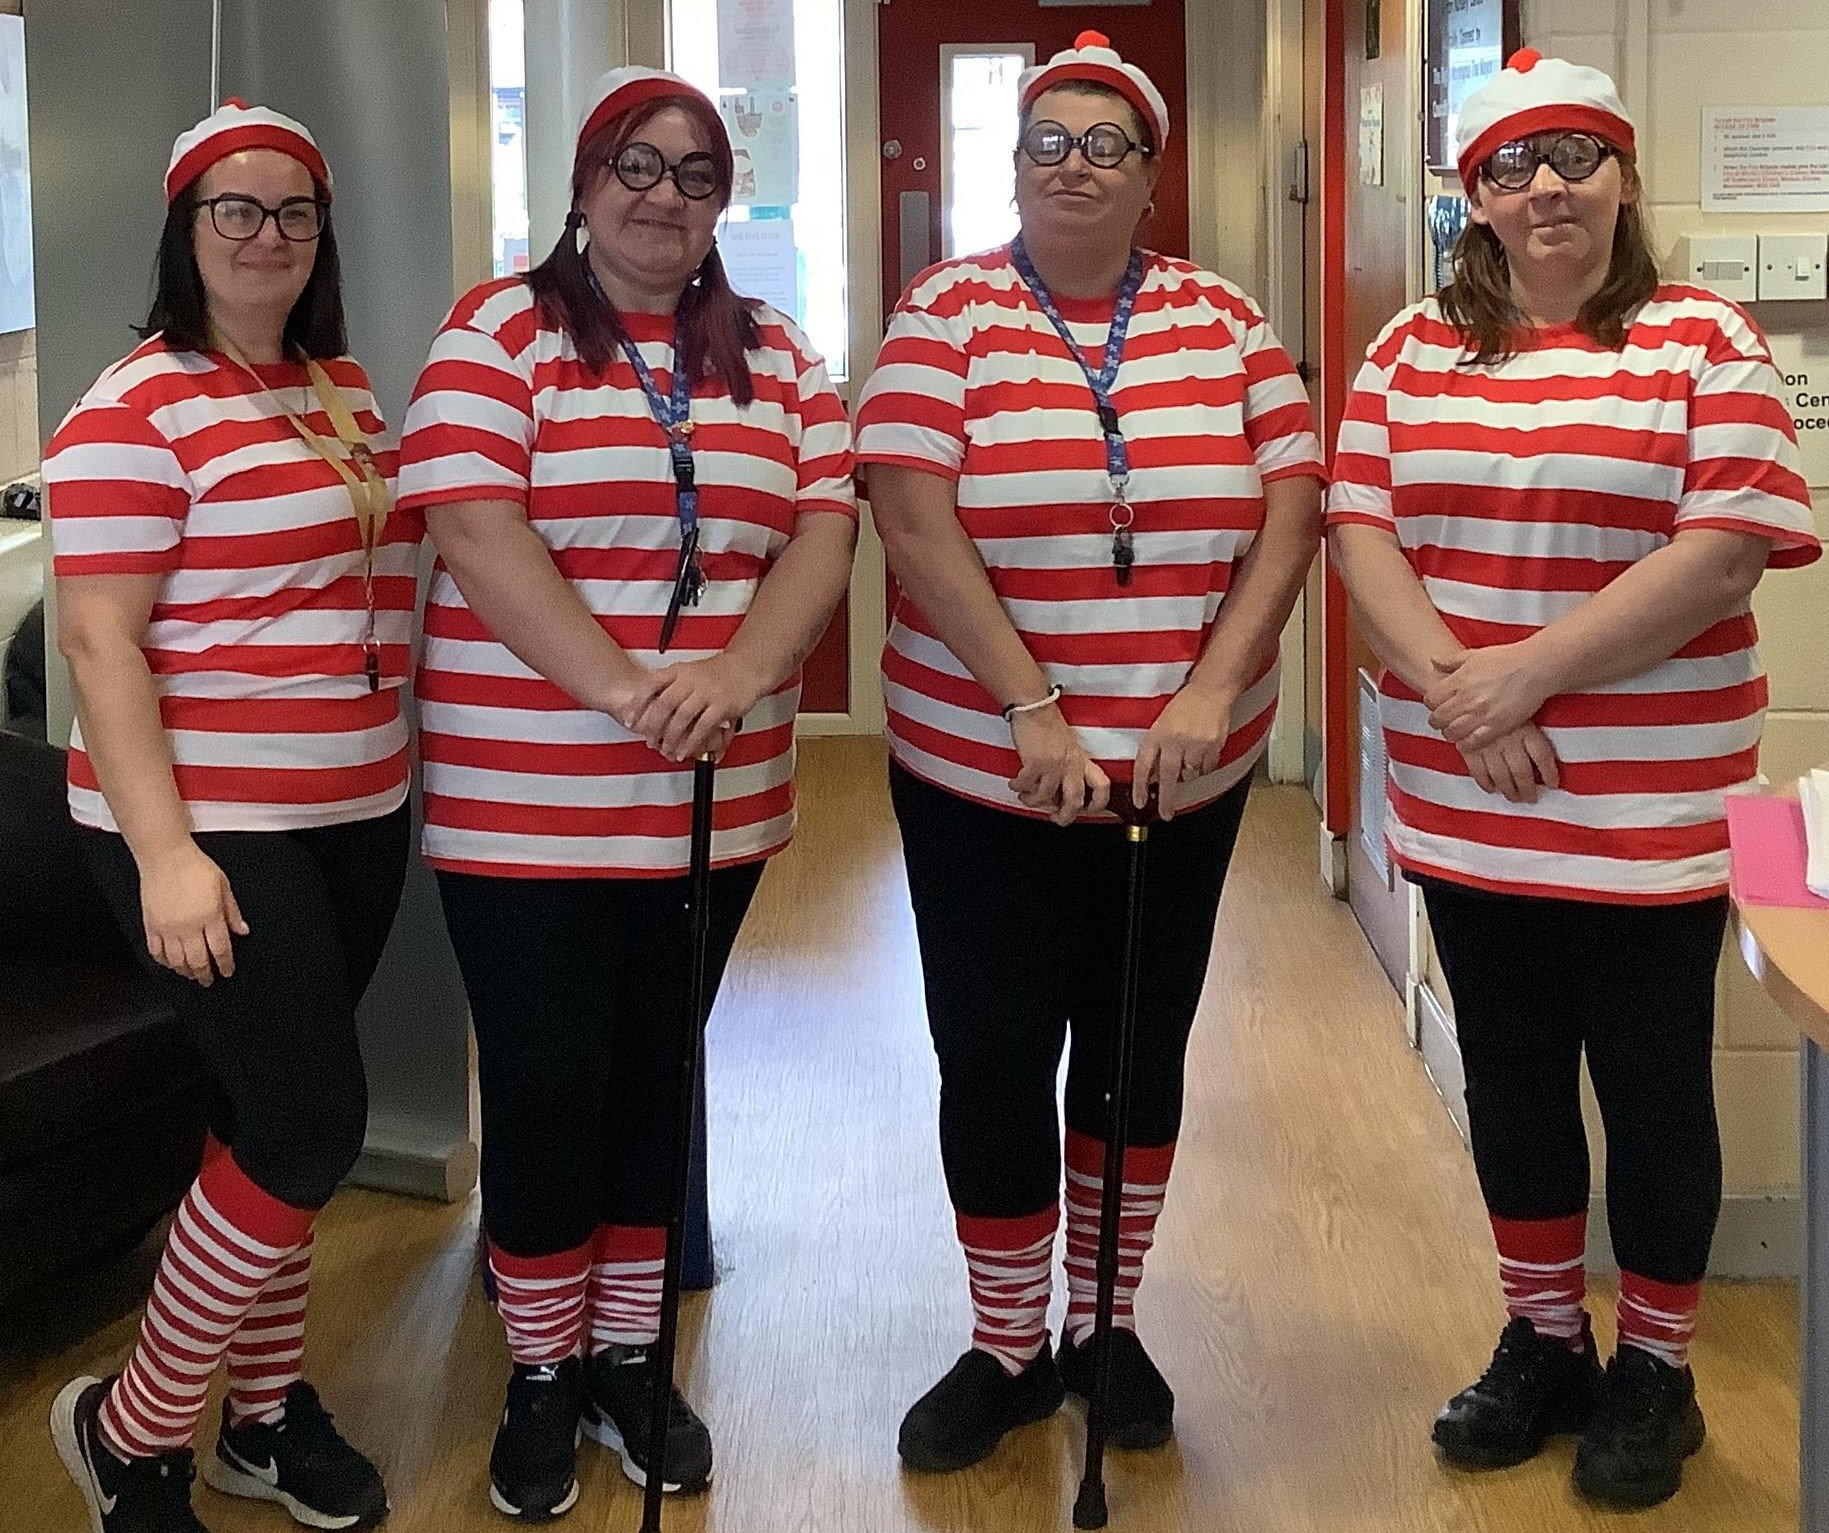 Members of staff dressed up as Wally from where's Wally